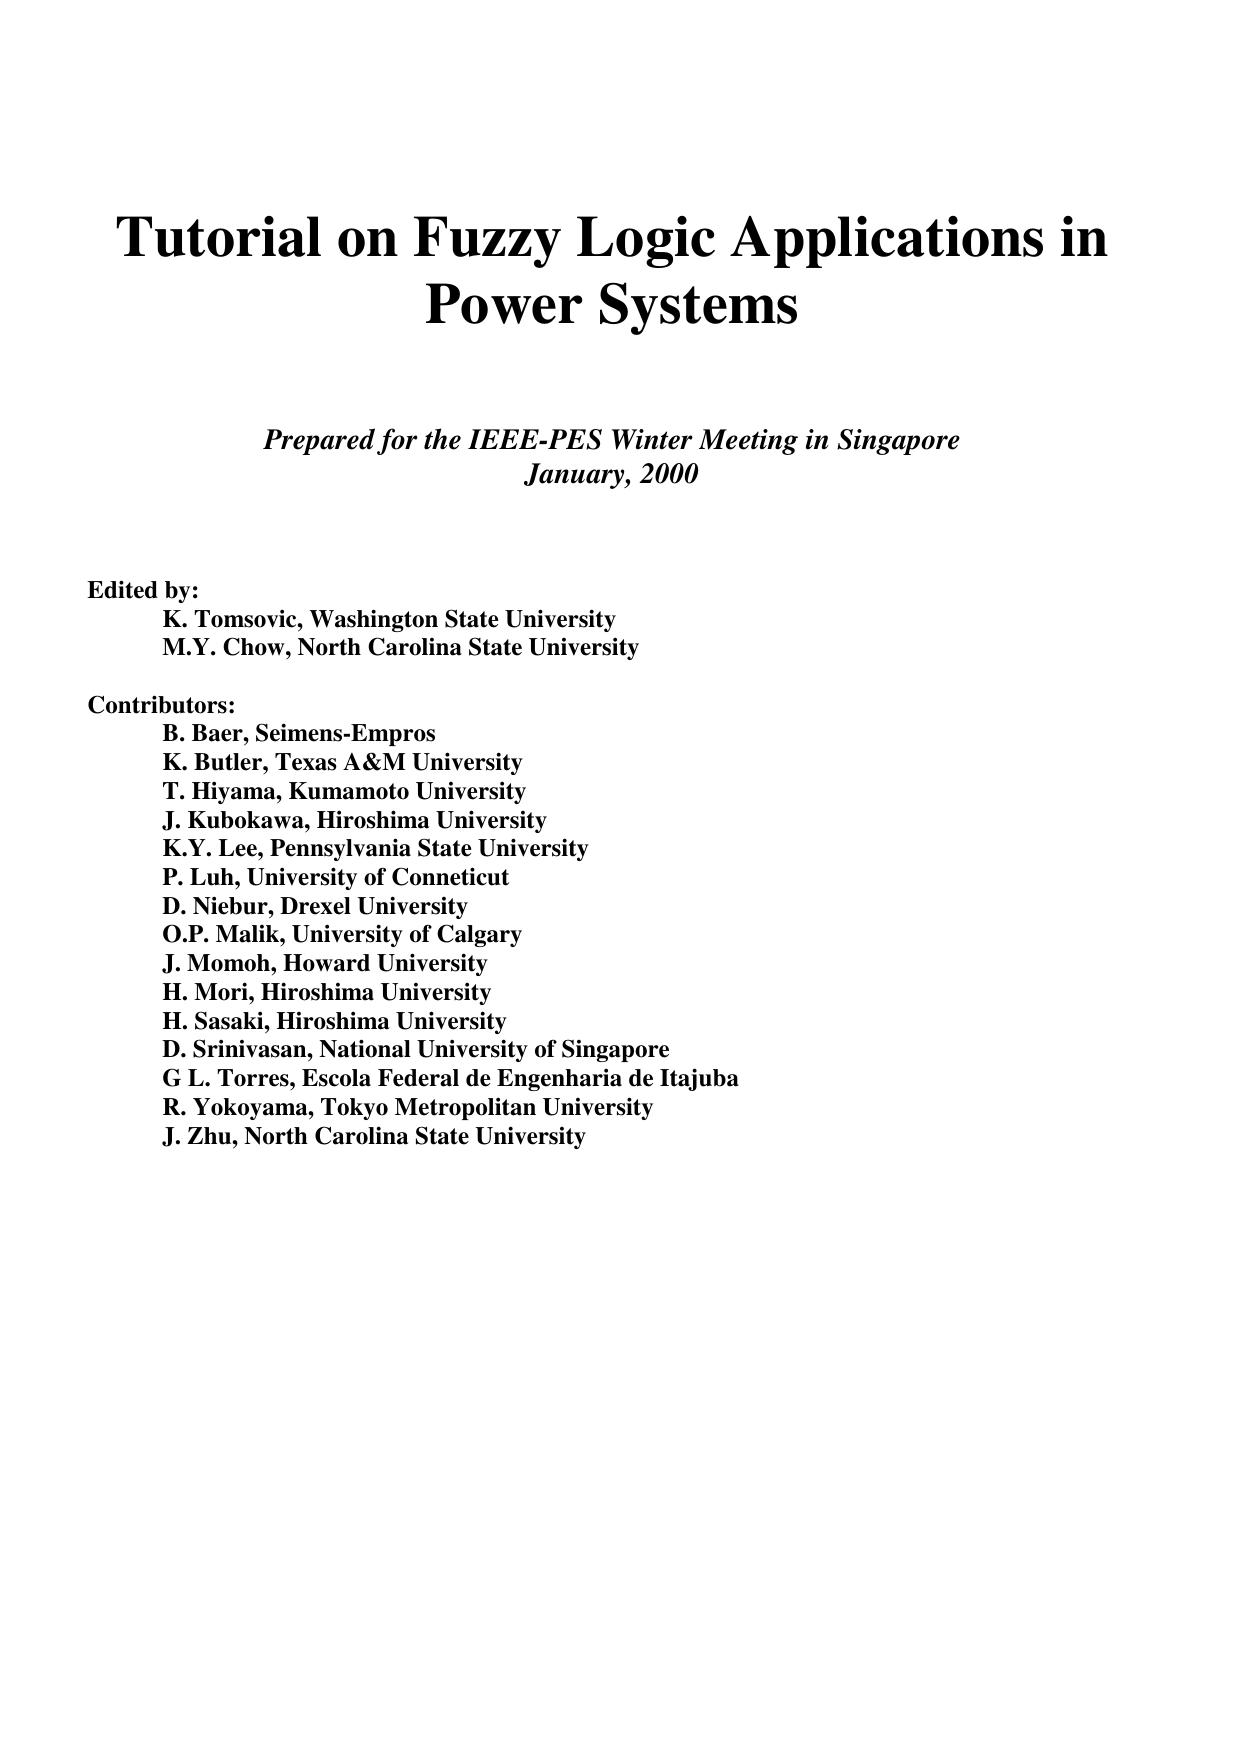 Tutorial on fuzzy logic applications in power systems